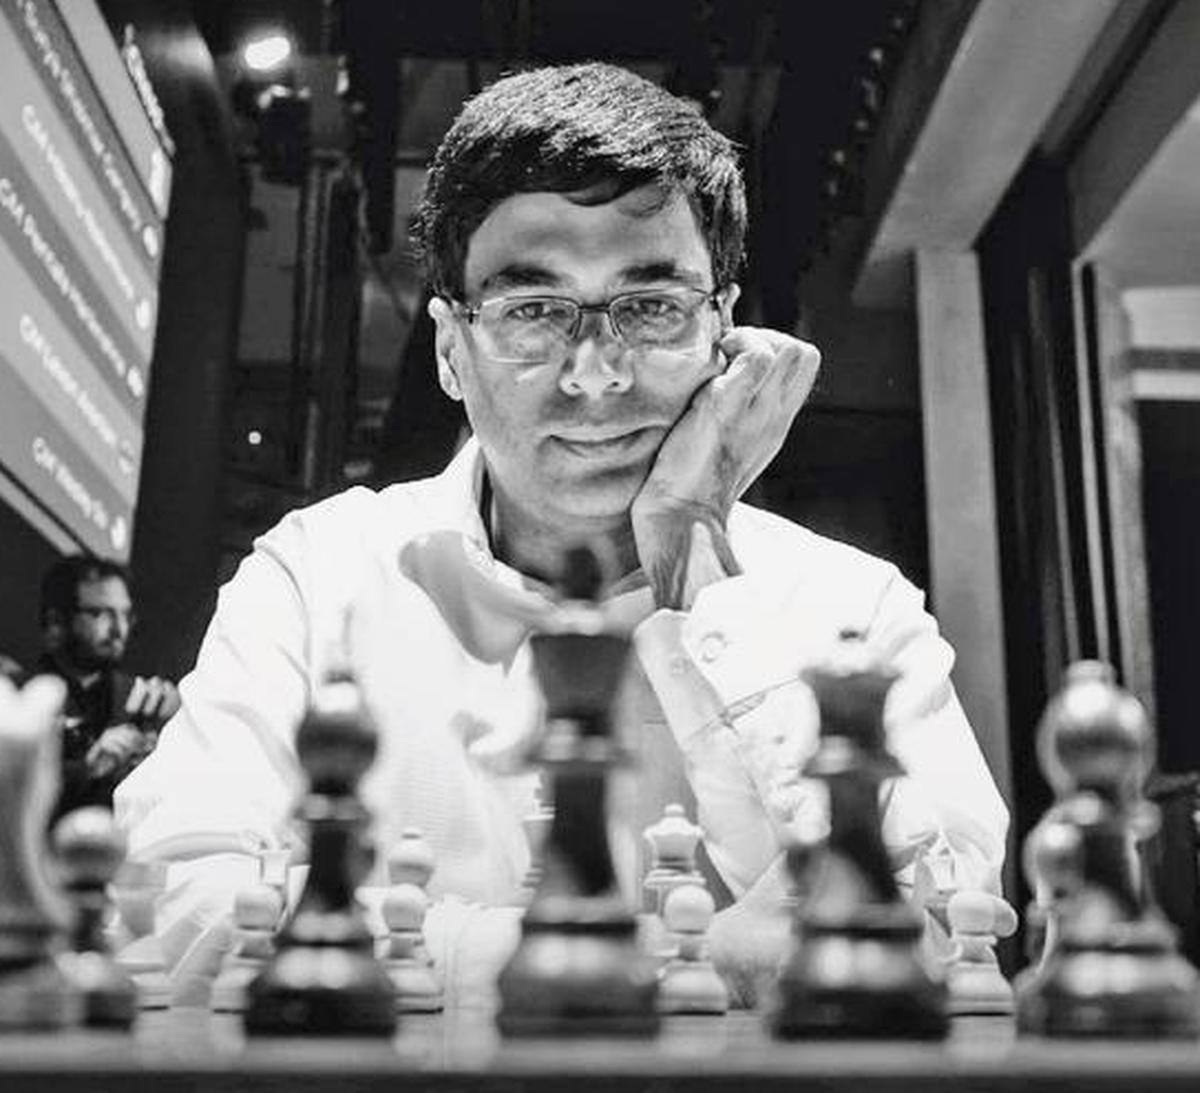 DD India on X: Sports Buzz  Norway Chess: Viswanathan Anand